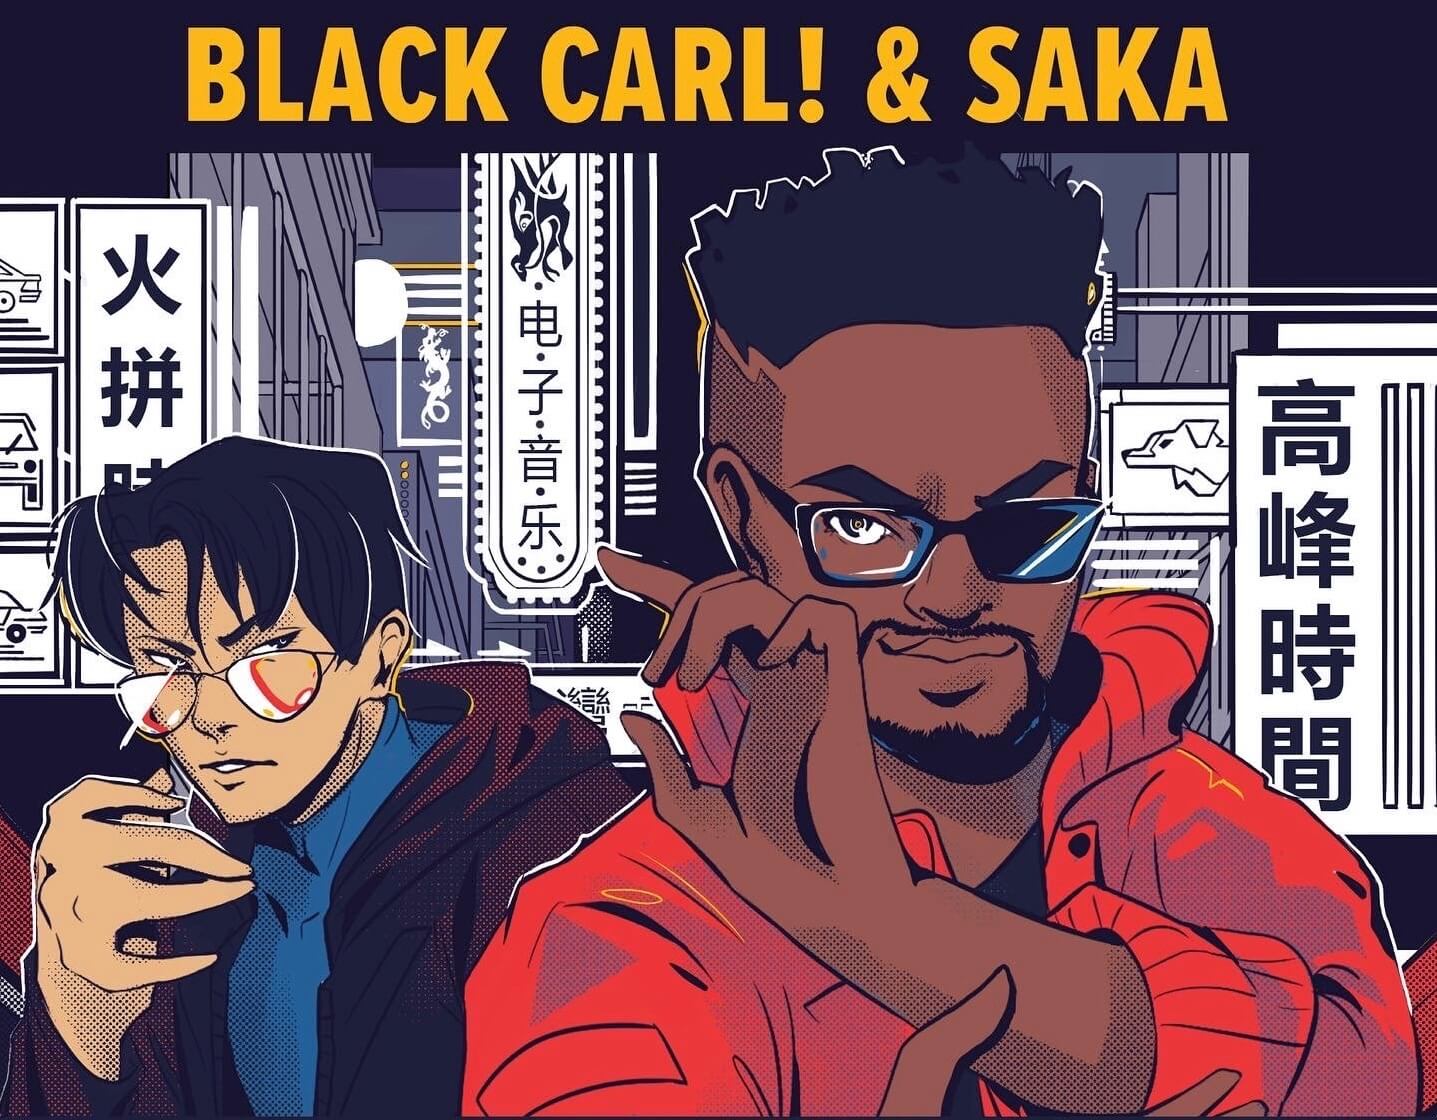 Black Carl! And Saka Join Forces On the Colorful Rush Hour EP